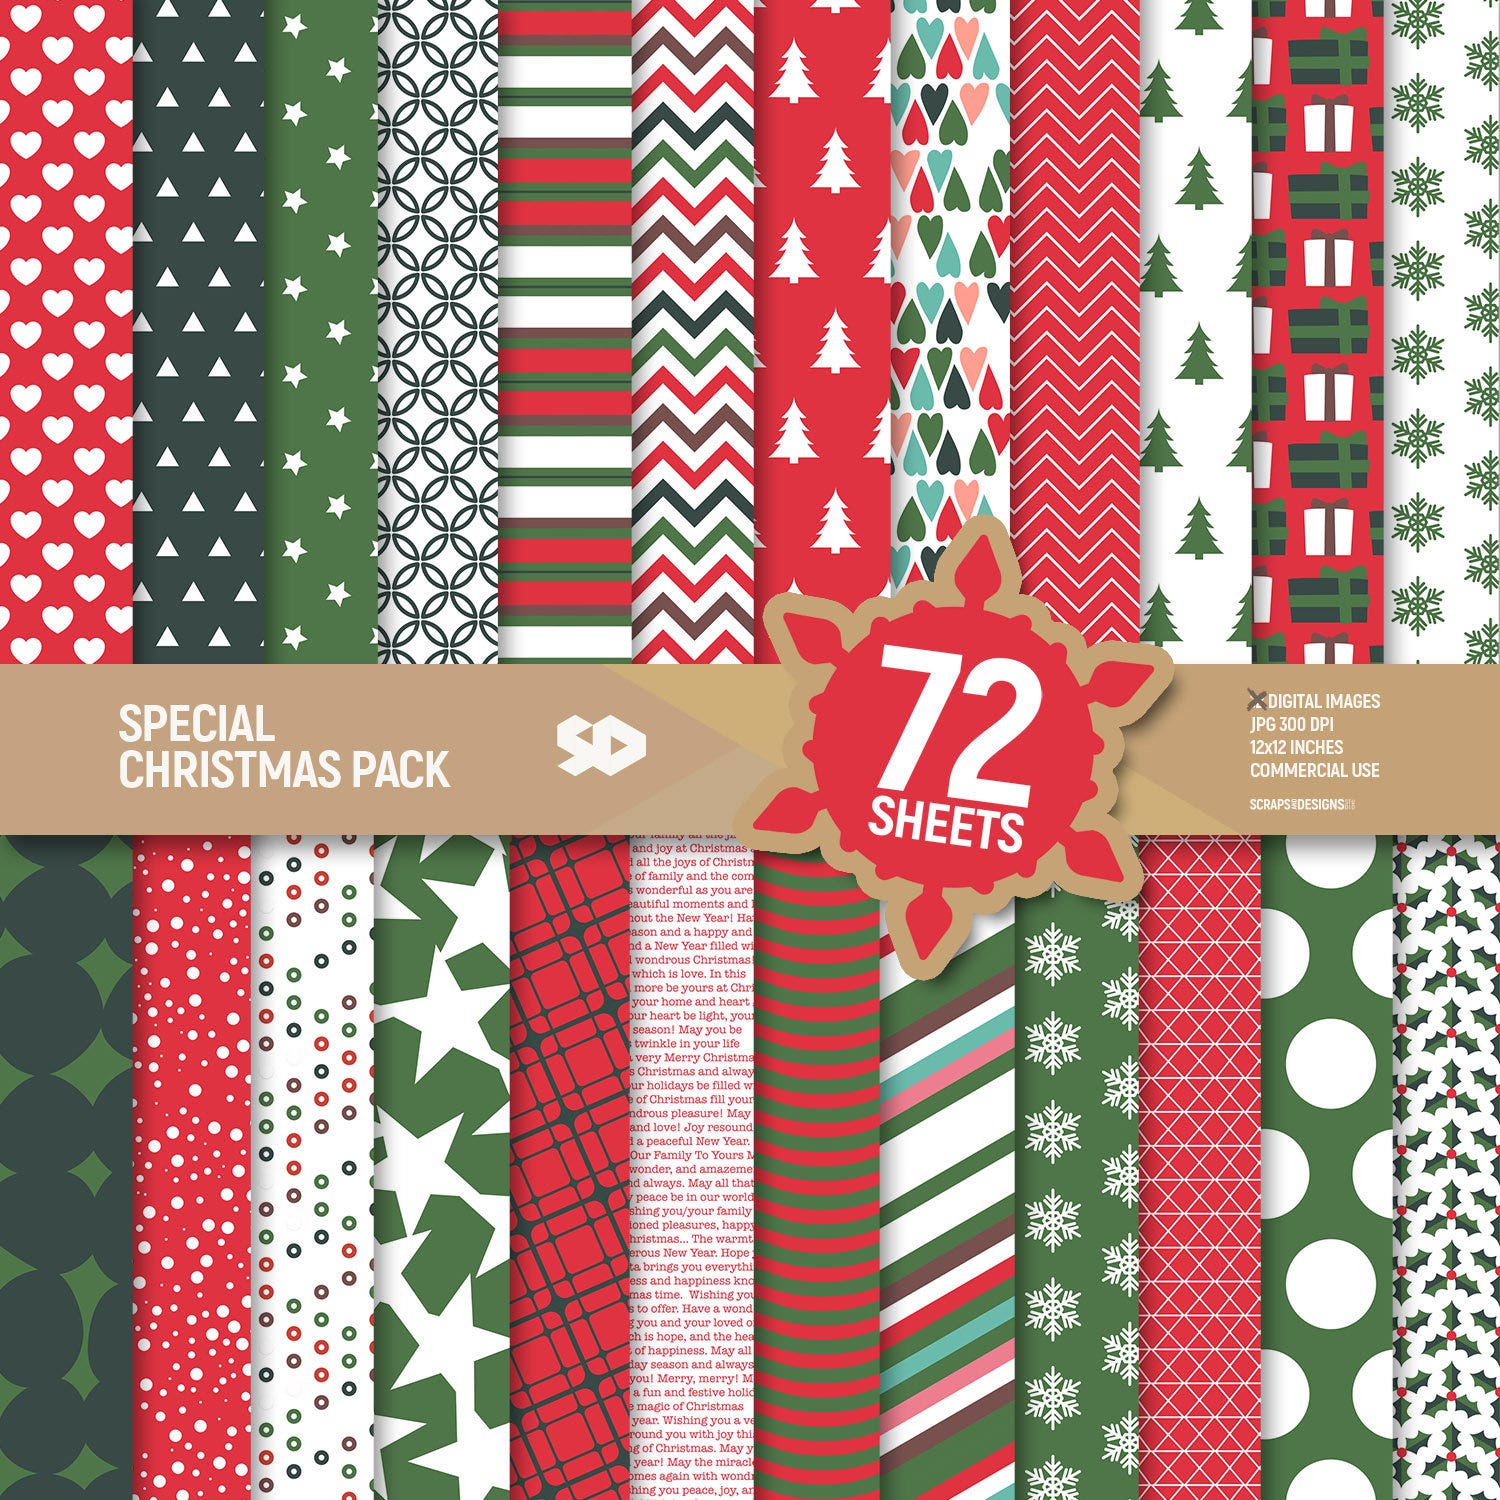 72 Christmas digital paper pack. Christmas scrapbooking pages, Xmas background, Christmas scrapbook sheets pattern printable. Commercial use